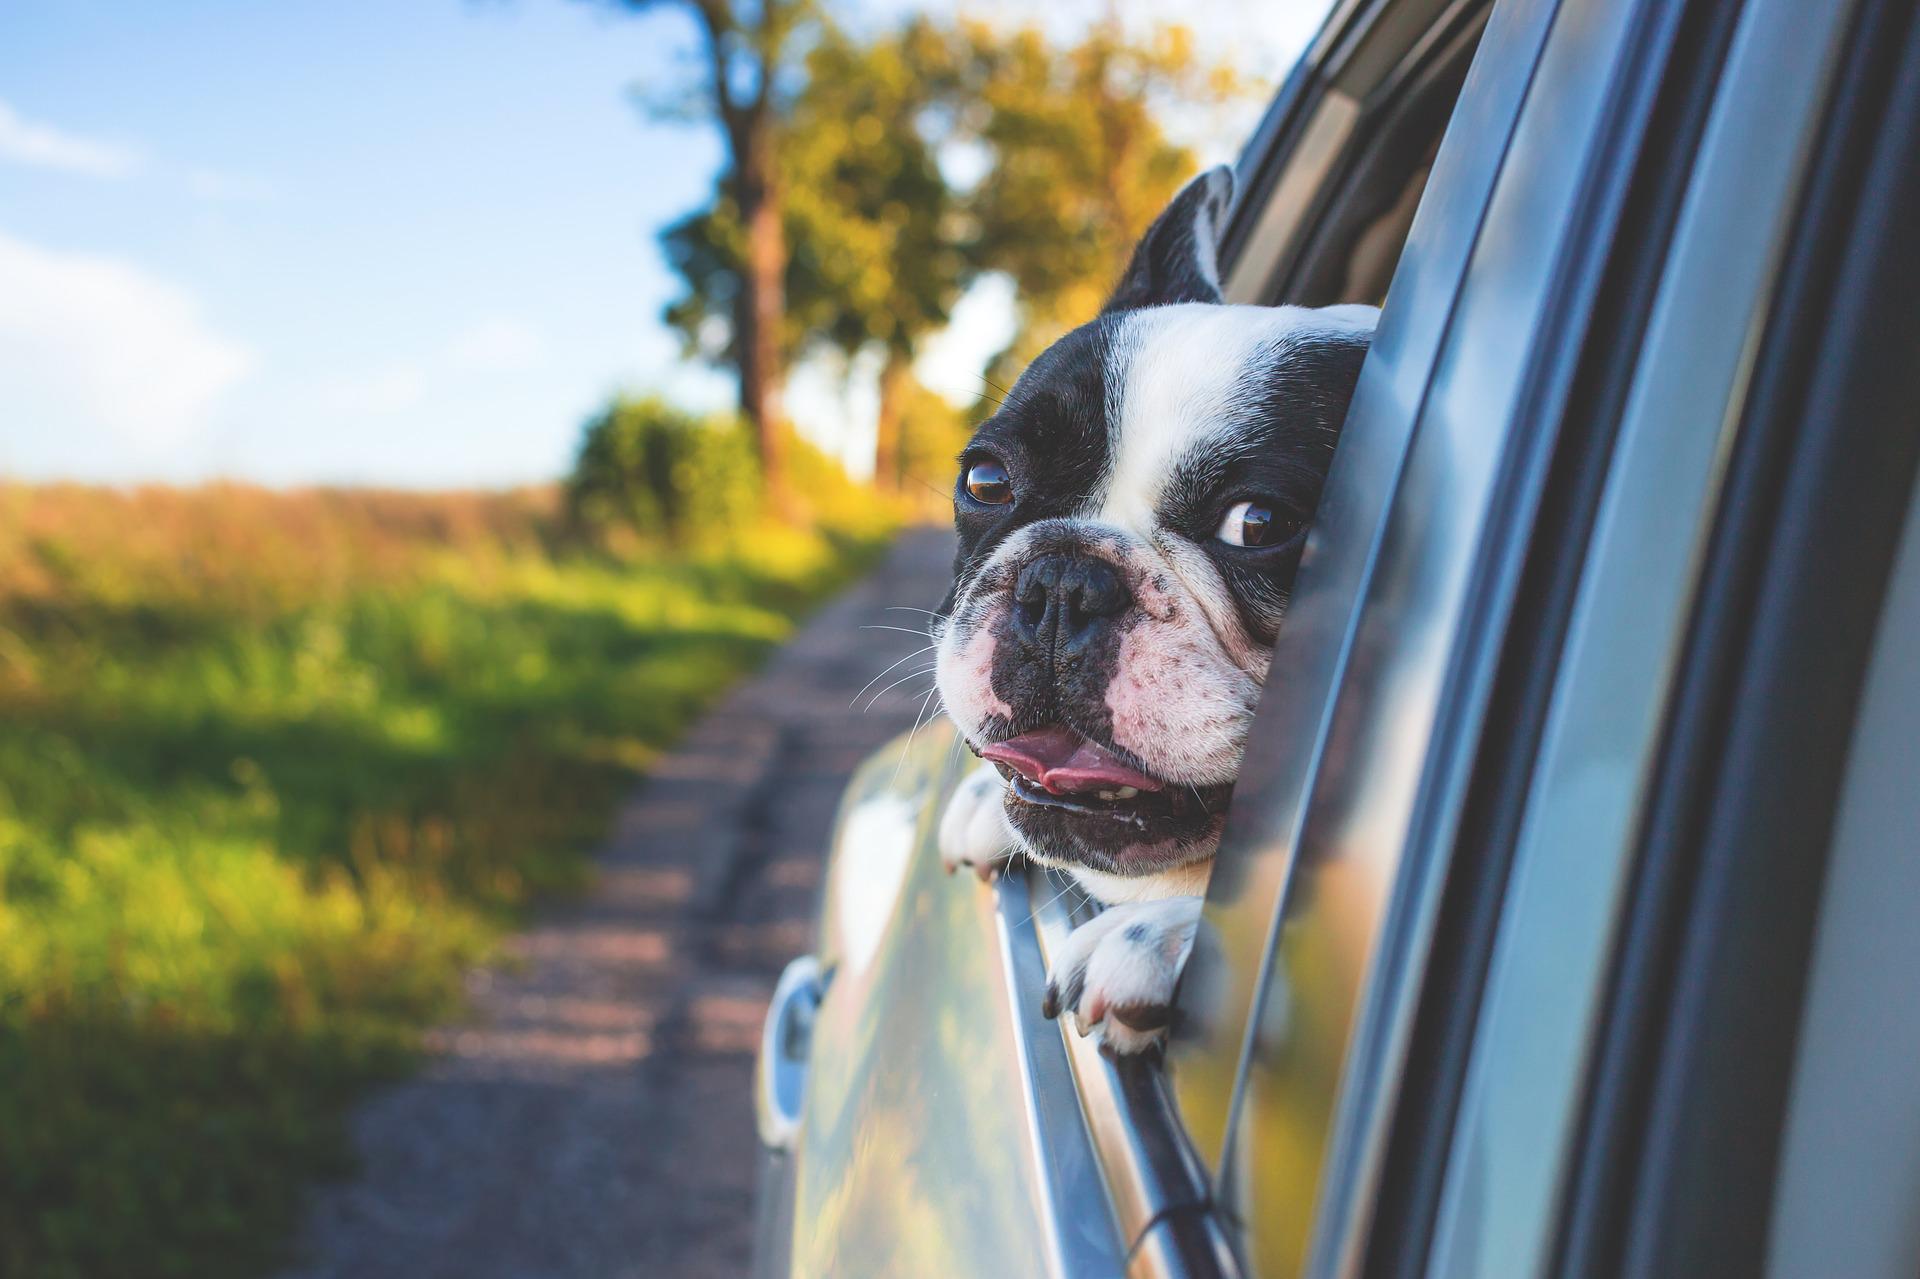 What are the criminal consequences for leaving the dog in the car?